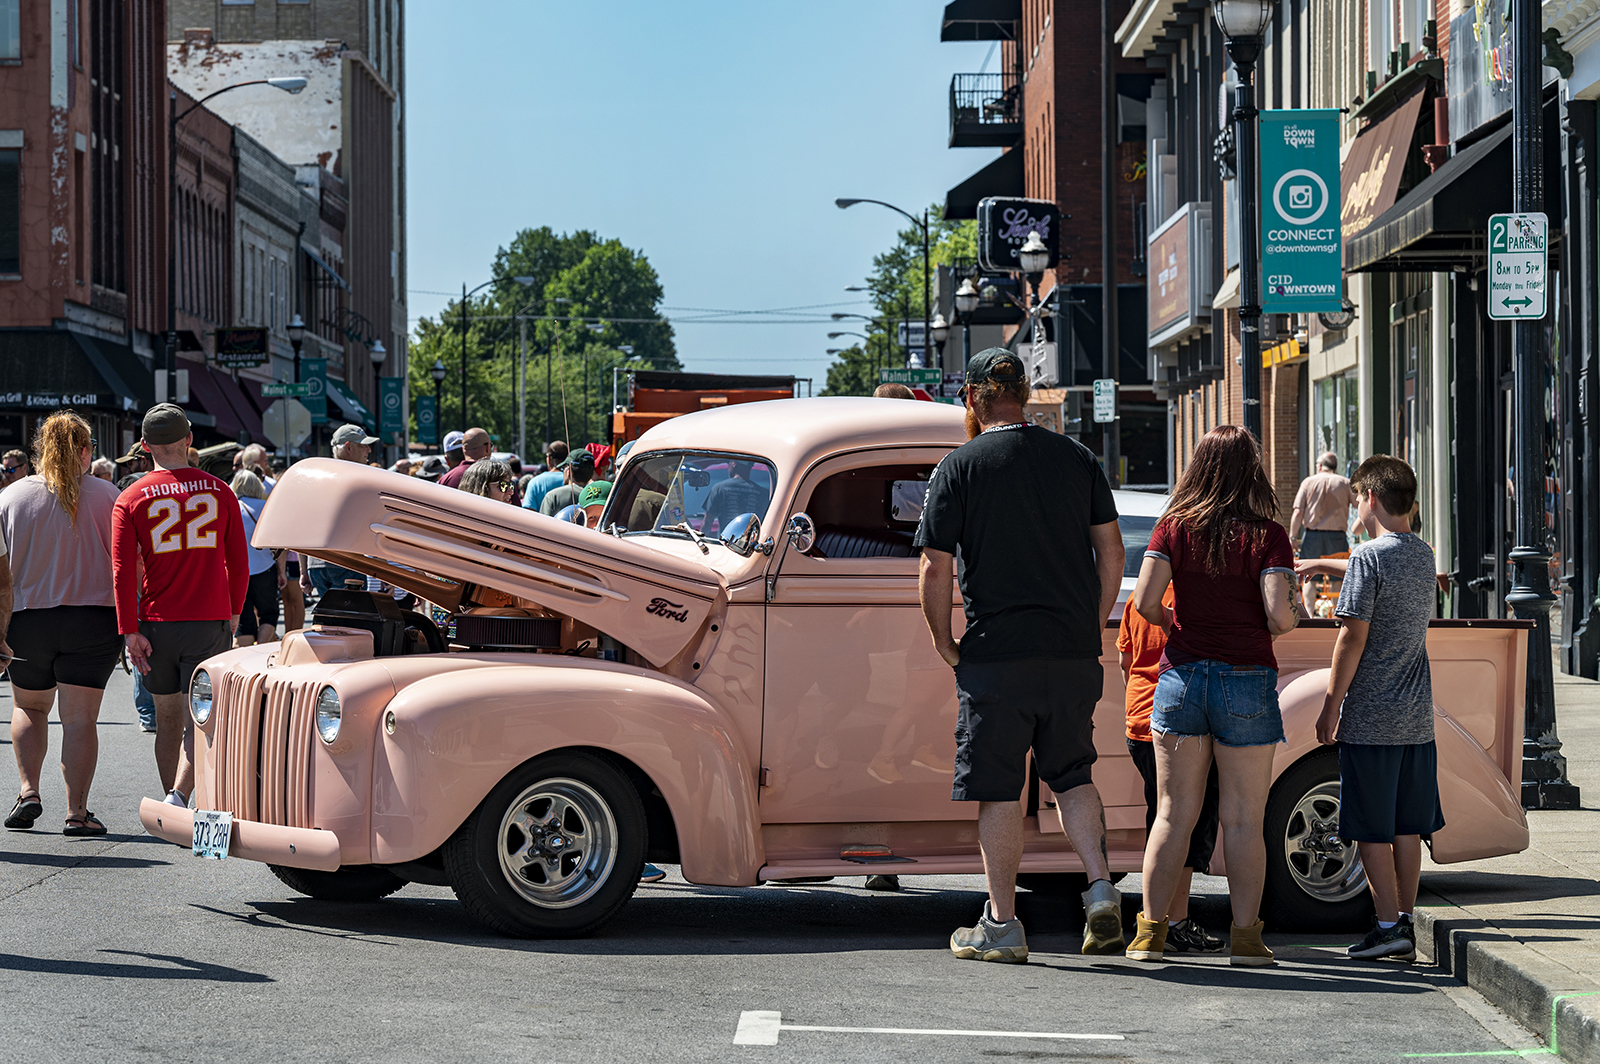 A family looks at a pink classic Ford truck